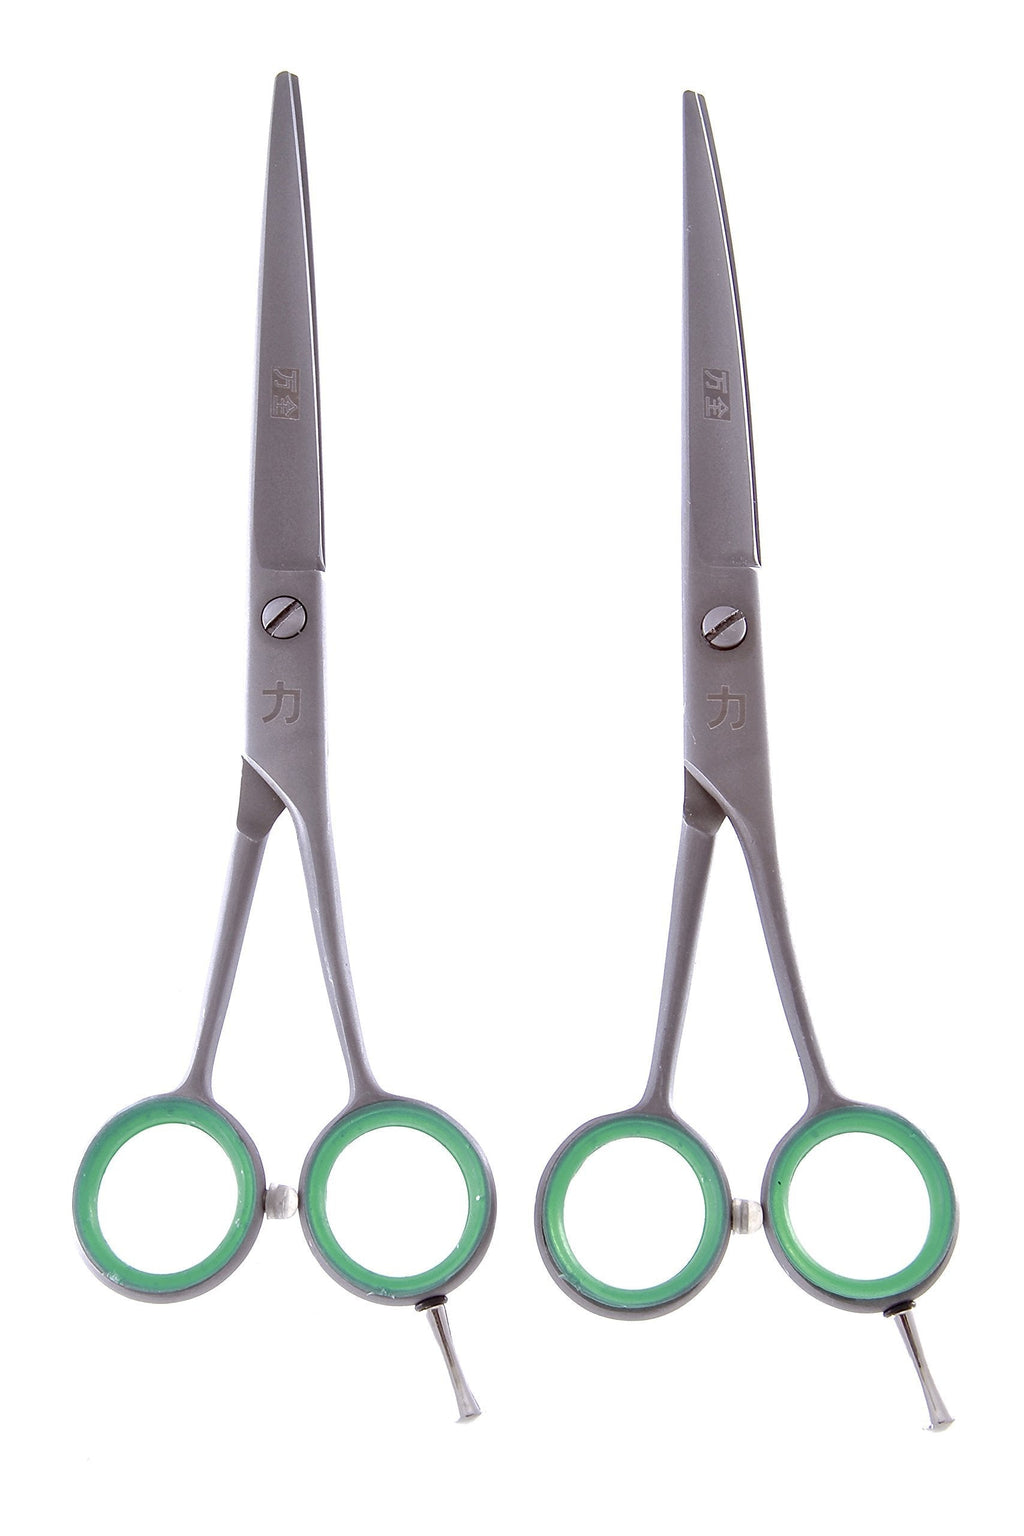 [Australia] - ShearsDirect Straight and Curved, Serated Blade, Professional Shear, 6.5-Inch, Set of 2 